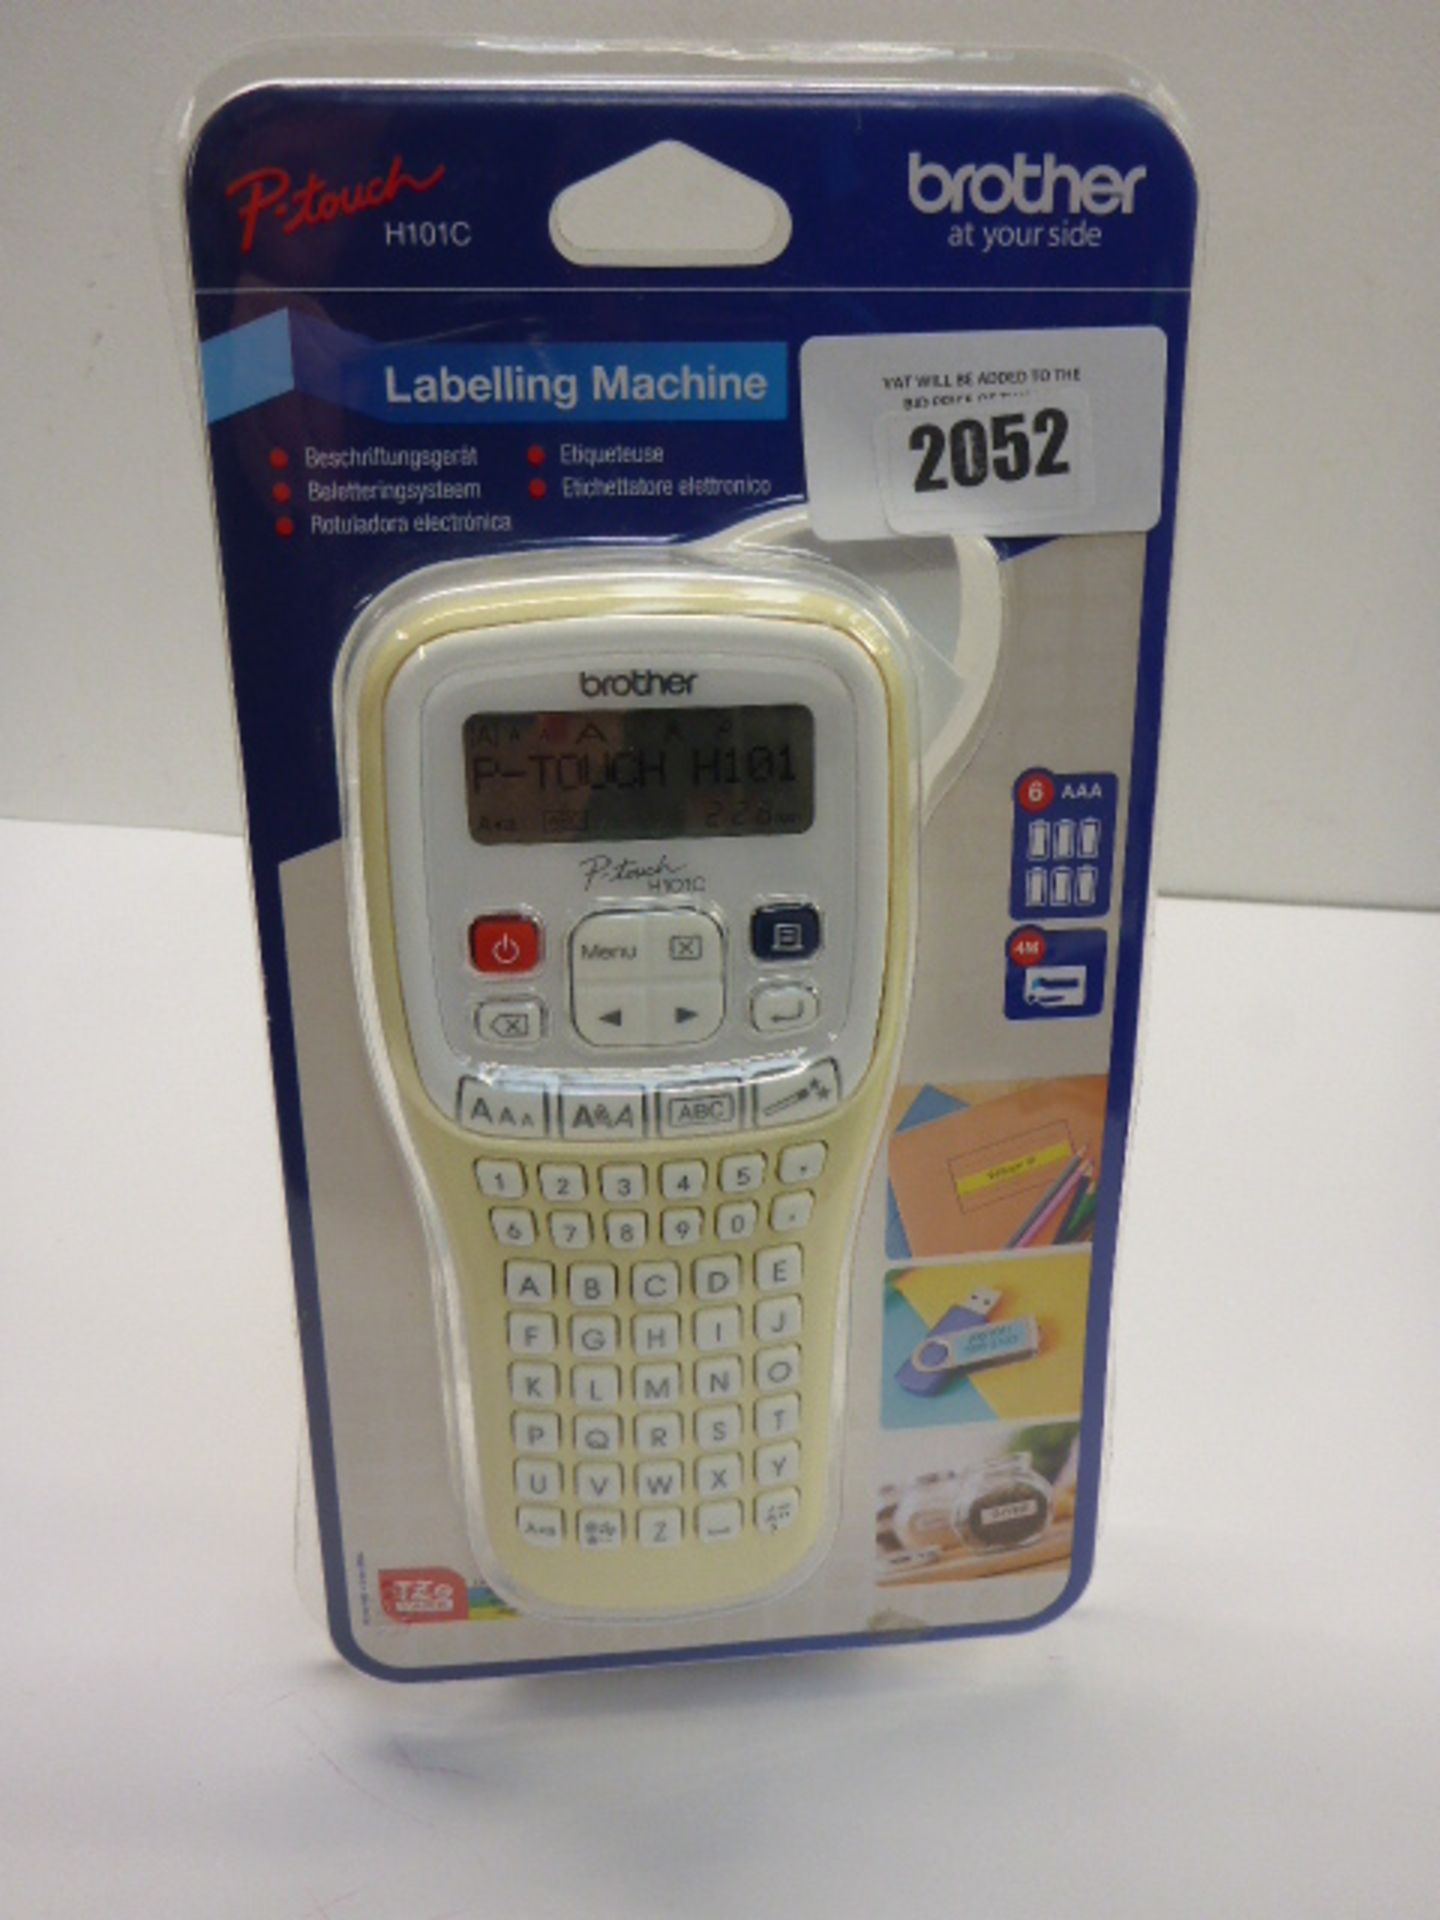 Brother P-Touch Label Printer in blister pack.